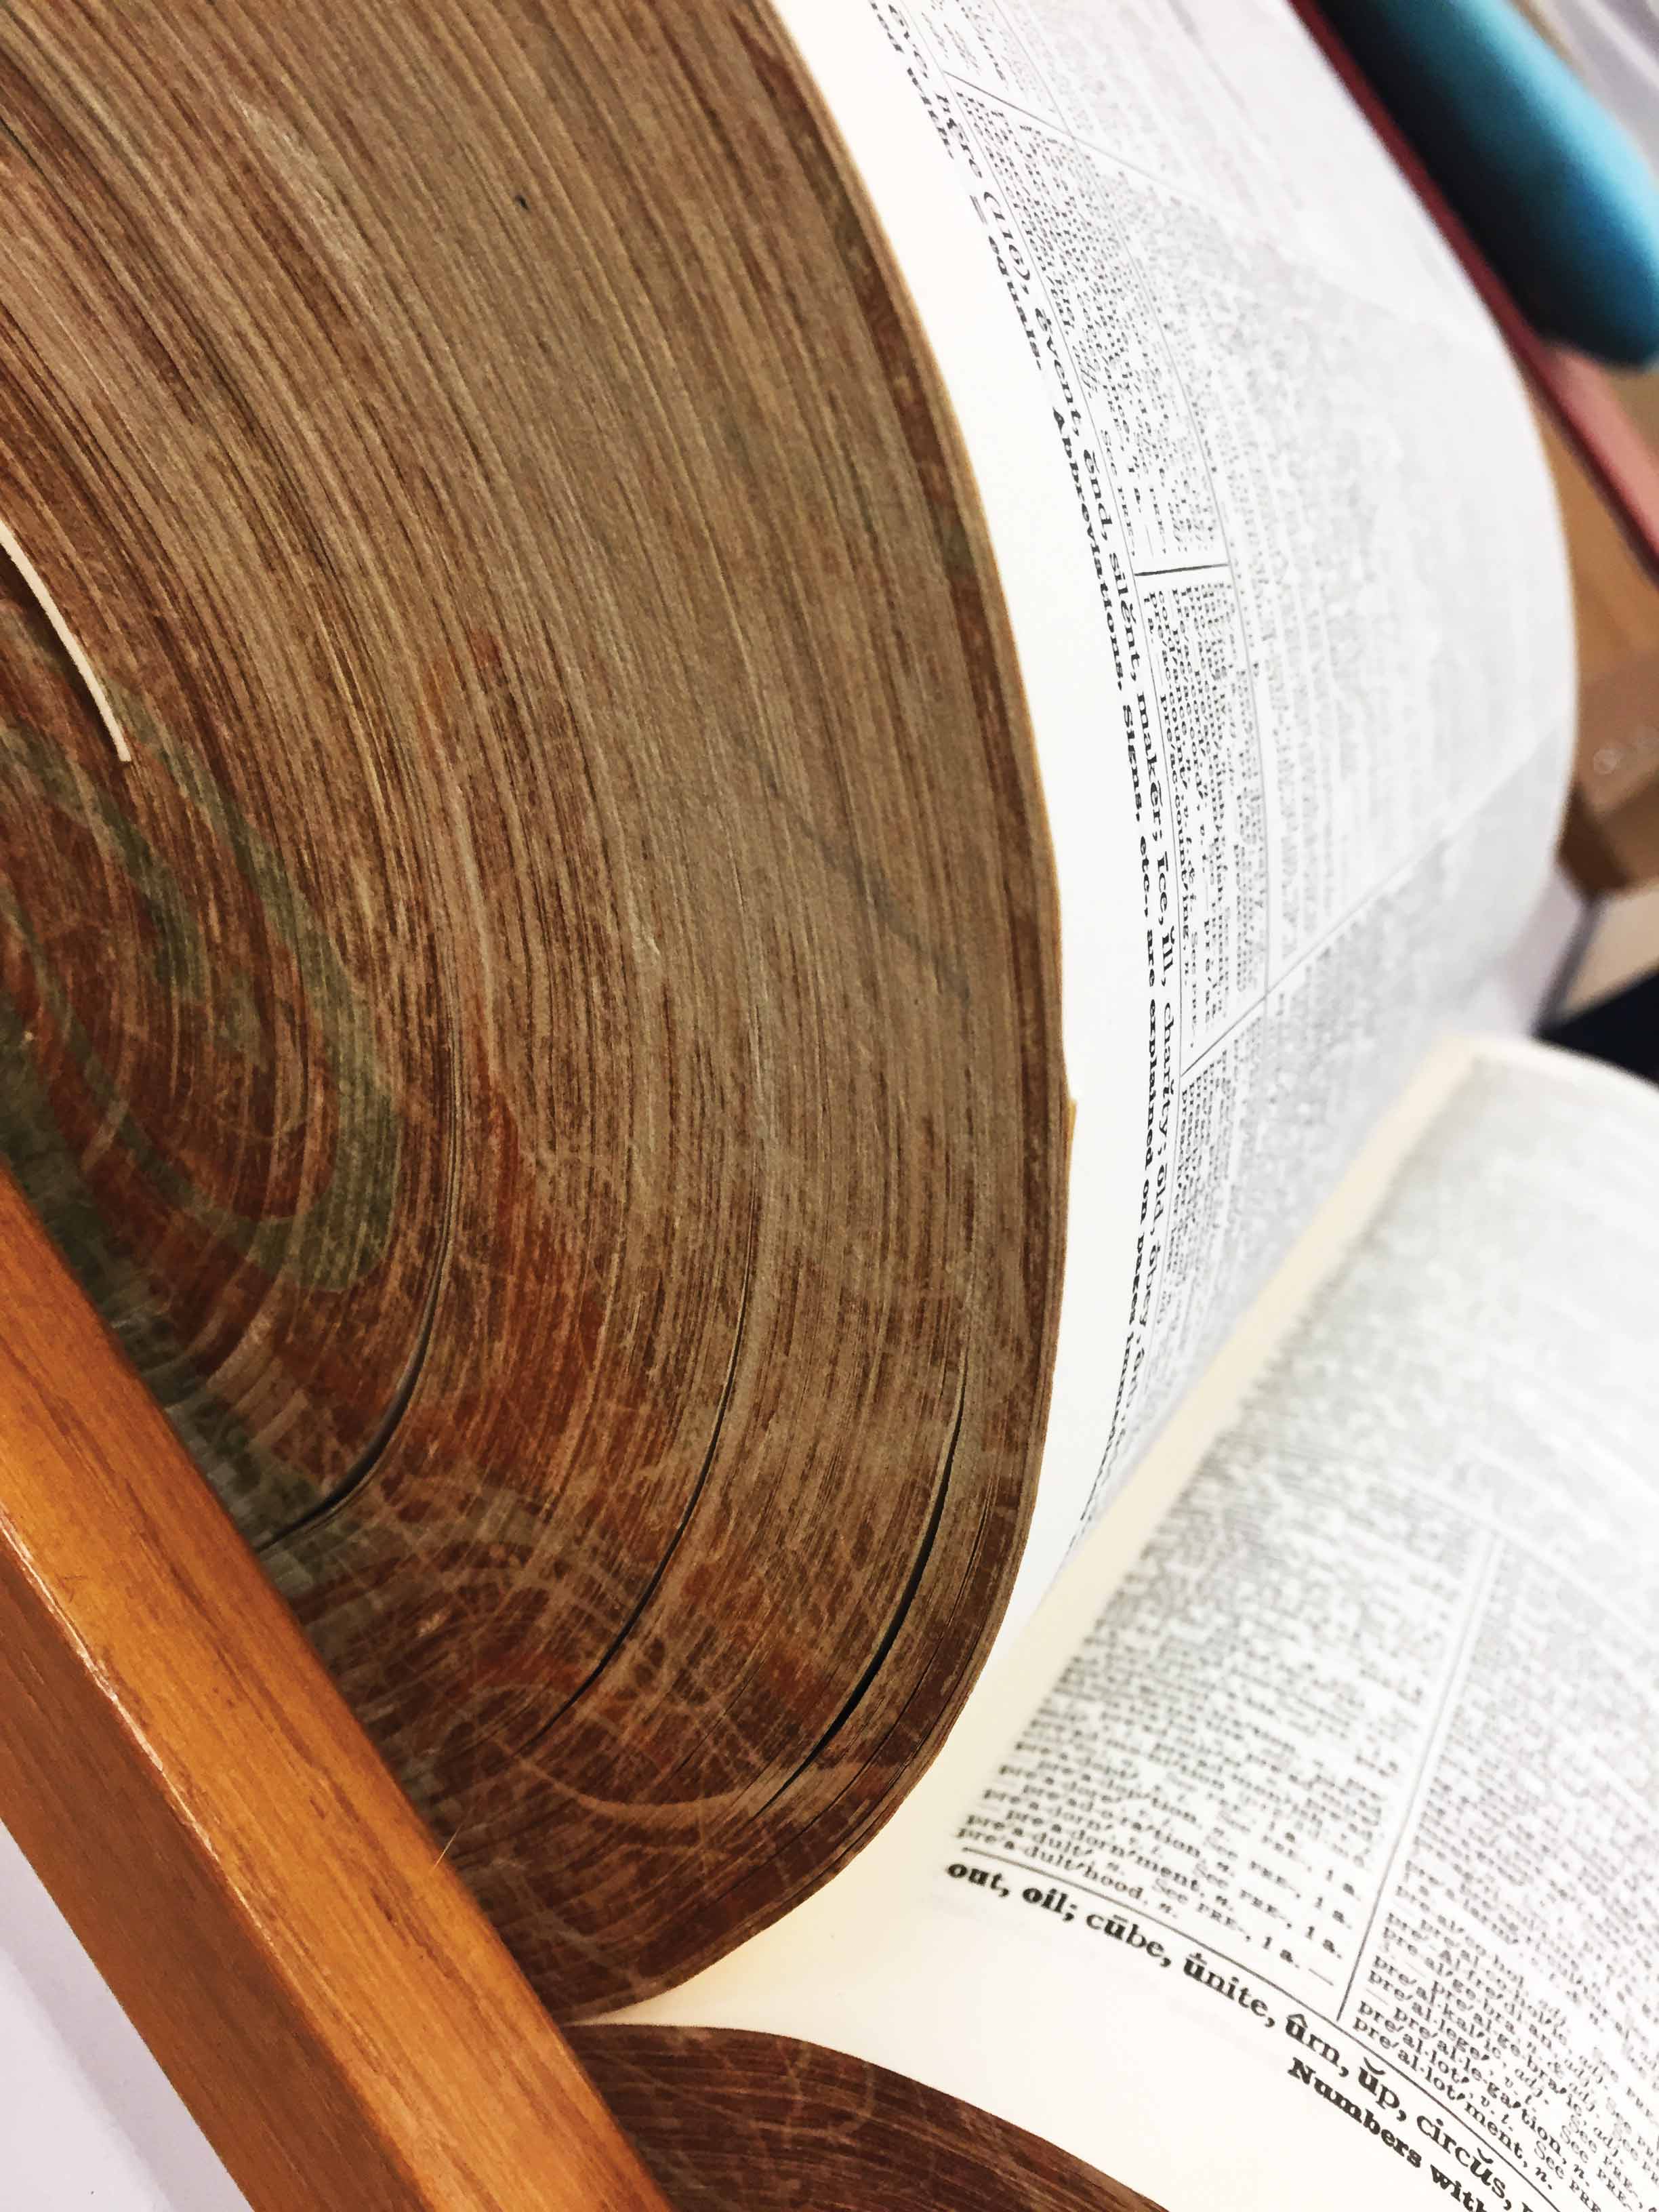 5 Benefits of a Print Dictionary